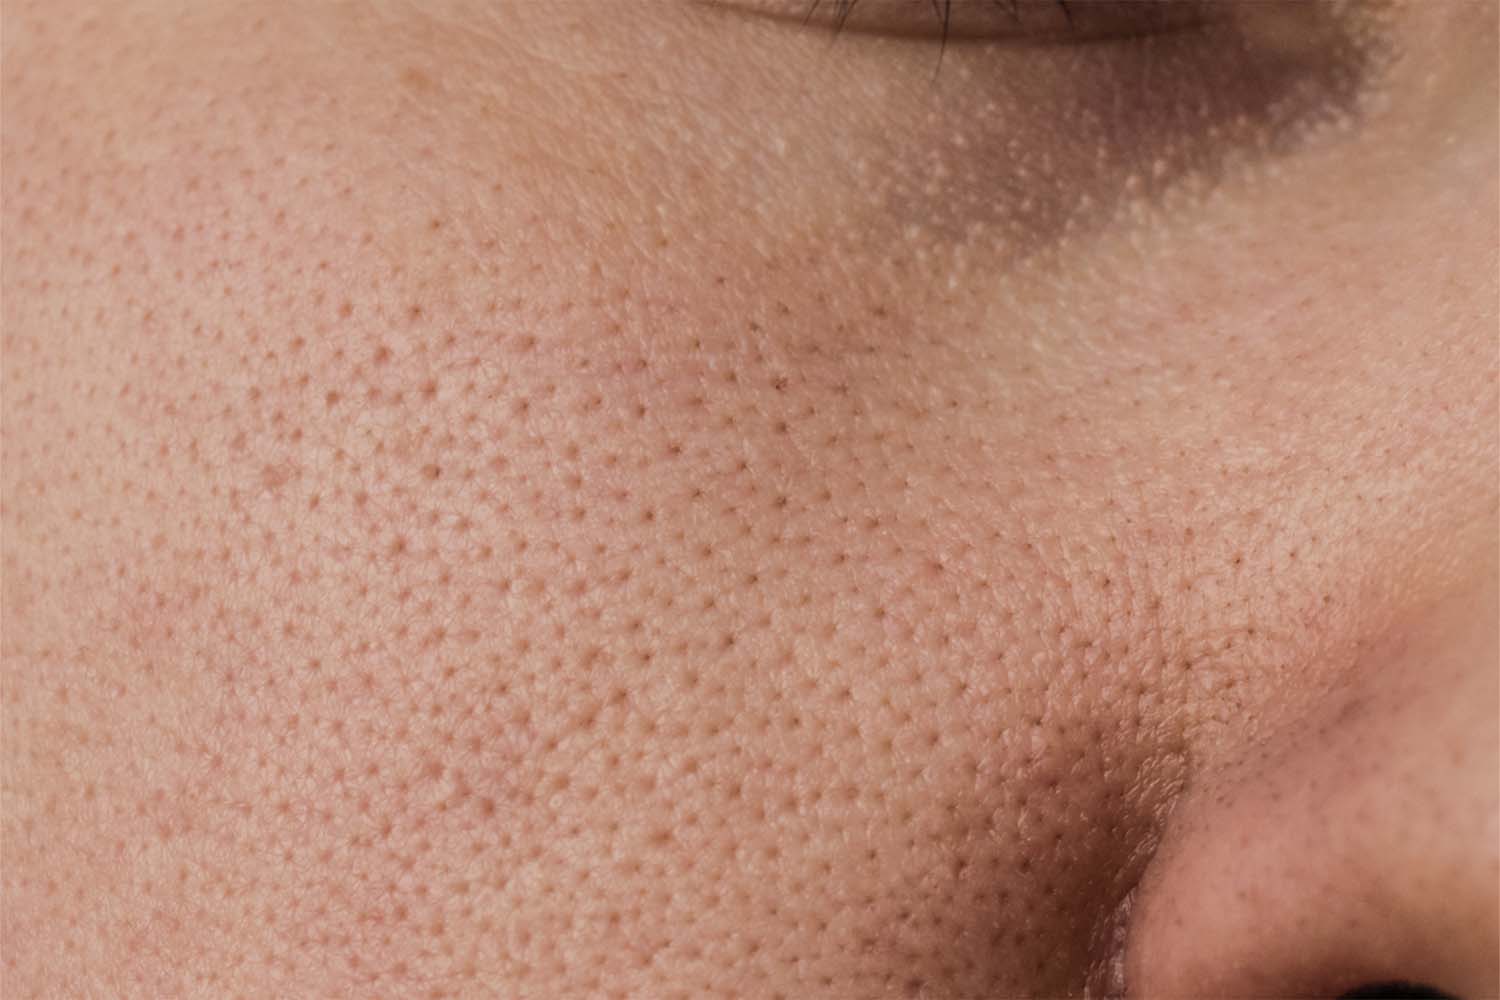 clogged pores before and after